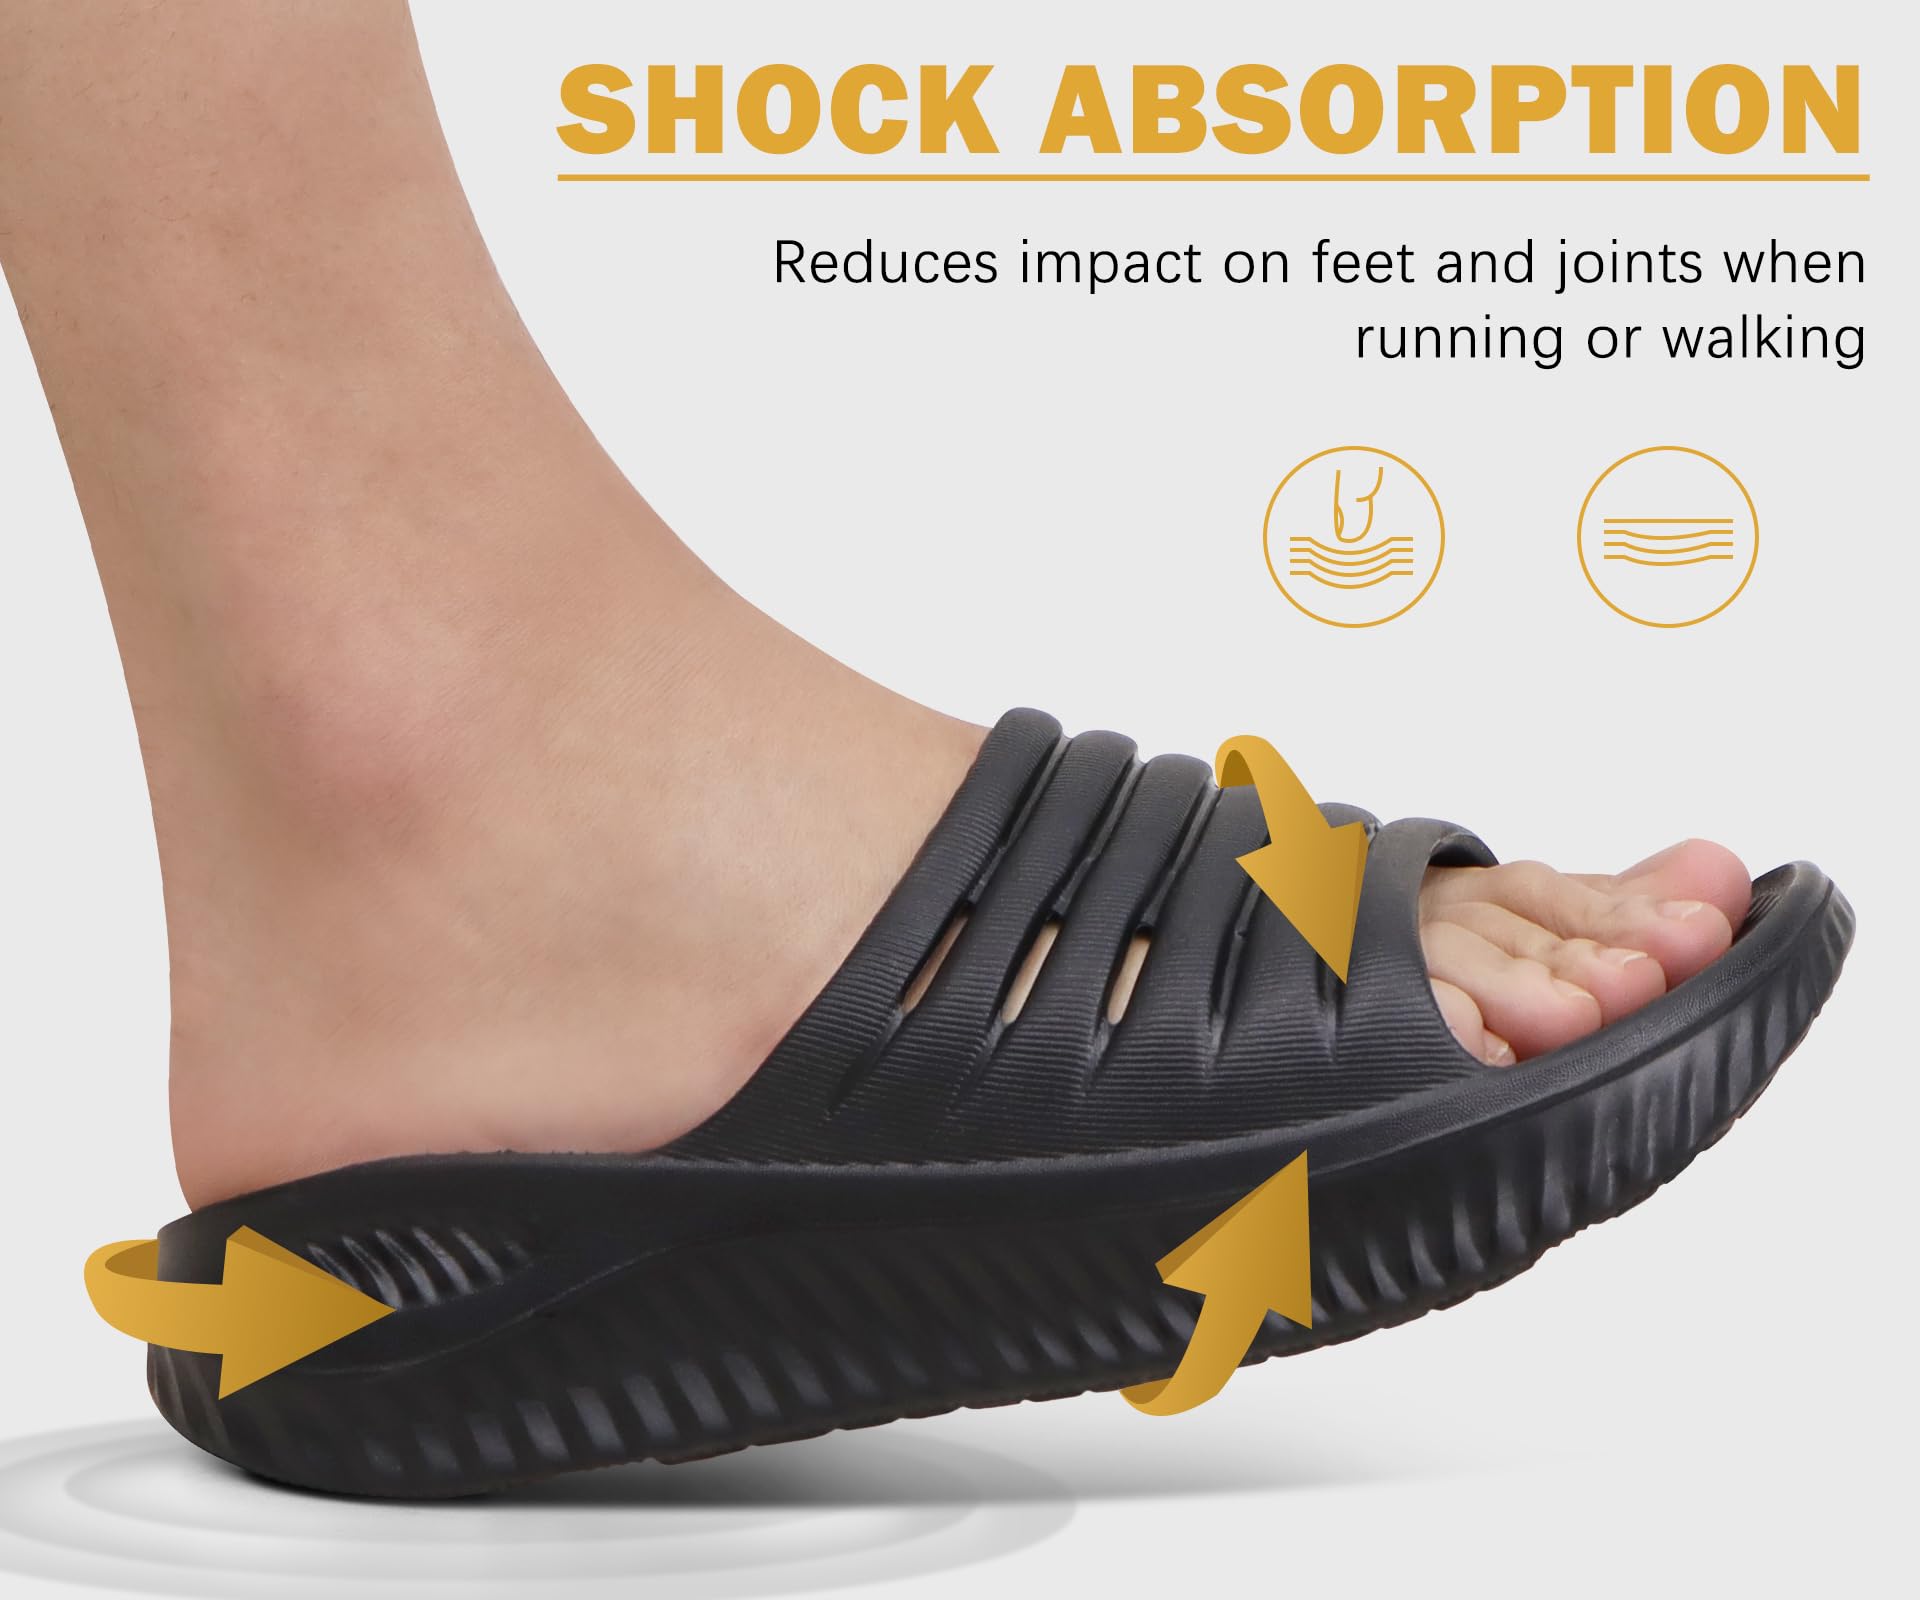 KuaiLu Womens Recovery Sandals Comfortable Plantar Fasciitis Arch Support Ladies Orthopedic Running Sport Slides Open Toe Slip On Thick Athletic Cushion Slippers Summer Pool Beach Sandles Black 10